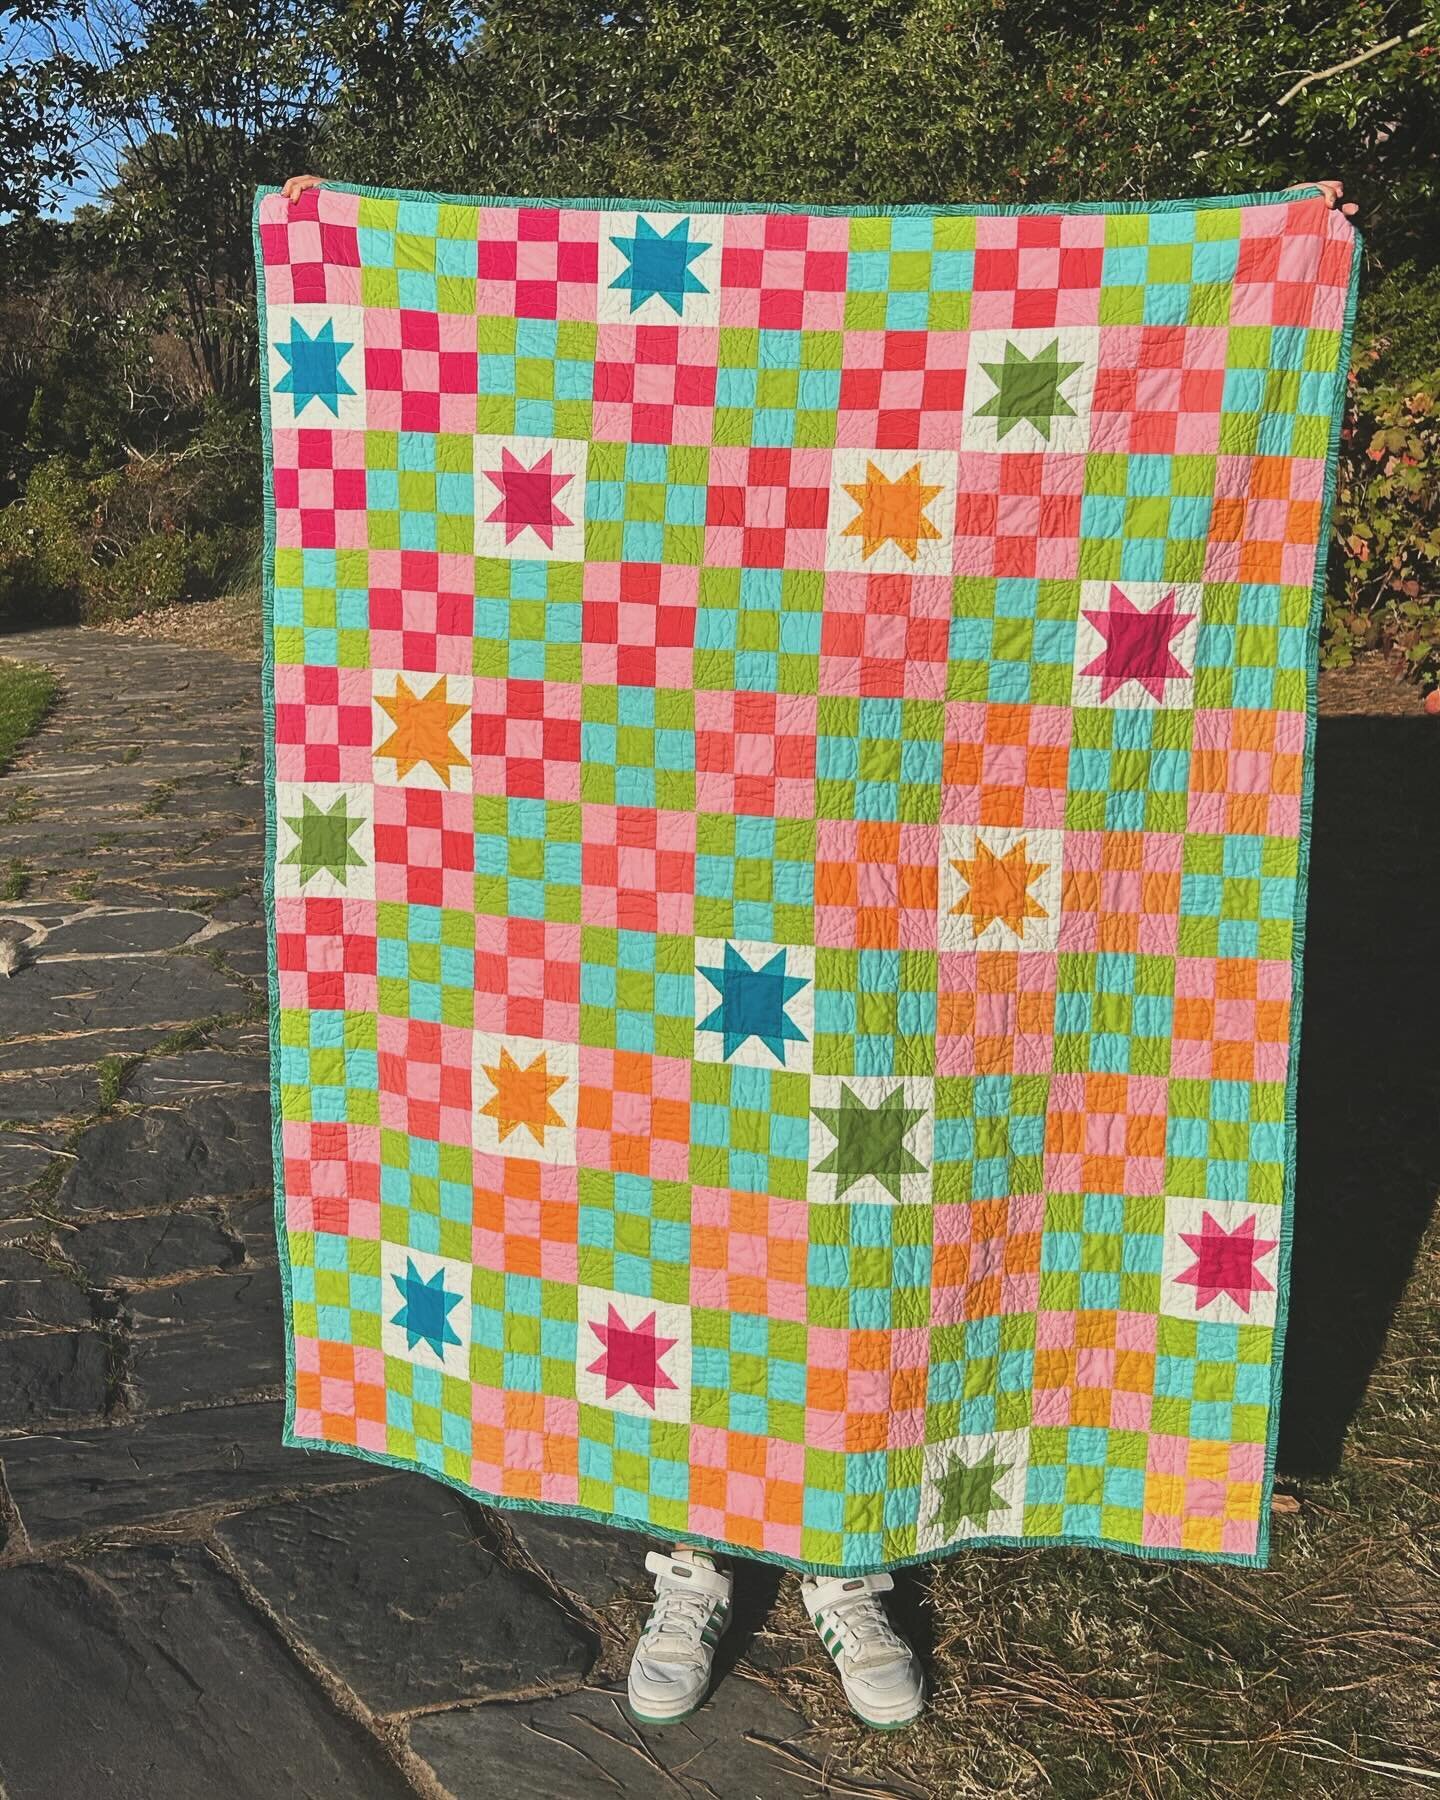 My first quilt for keeps! A quilt that reminds me of our wedding: the perfect sunset, the garden&rsquo;s palm leaves, and the people who celebrated with us. I love it so, so much.

I&rsquo;ve spent the last year holding my breath, rushing and waiting